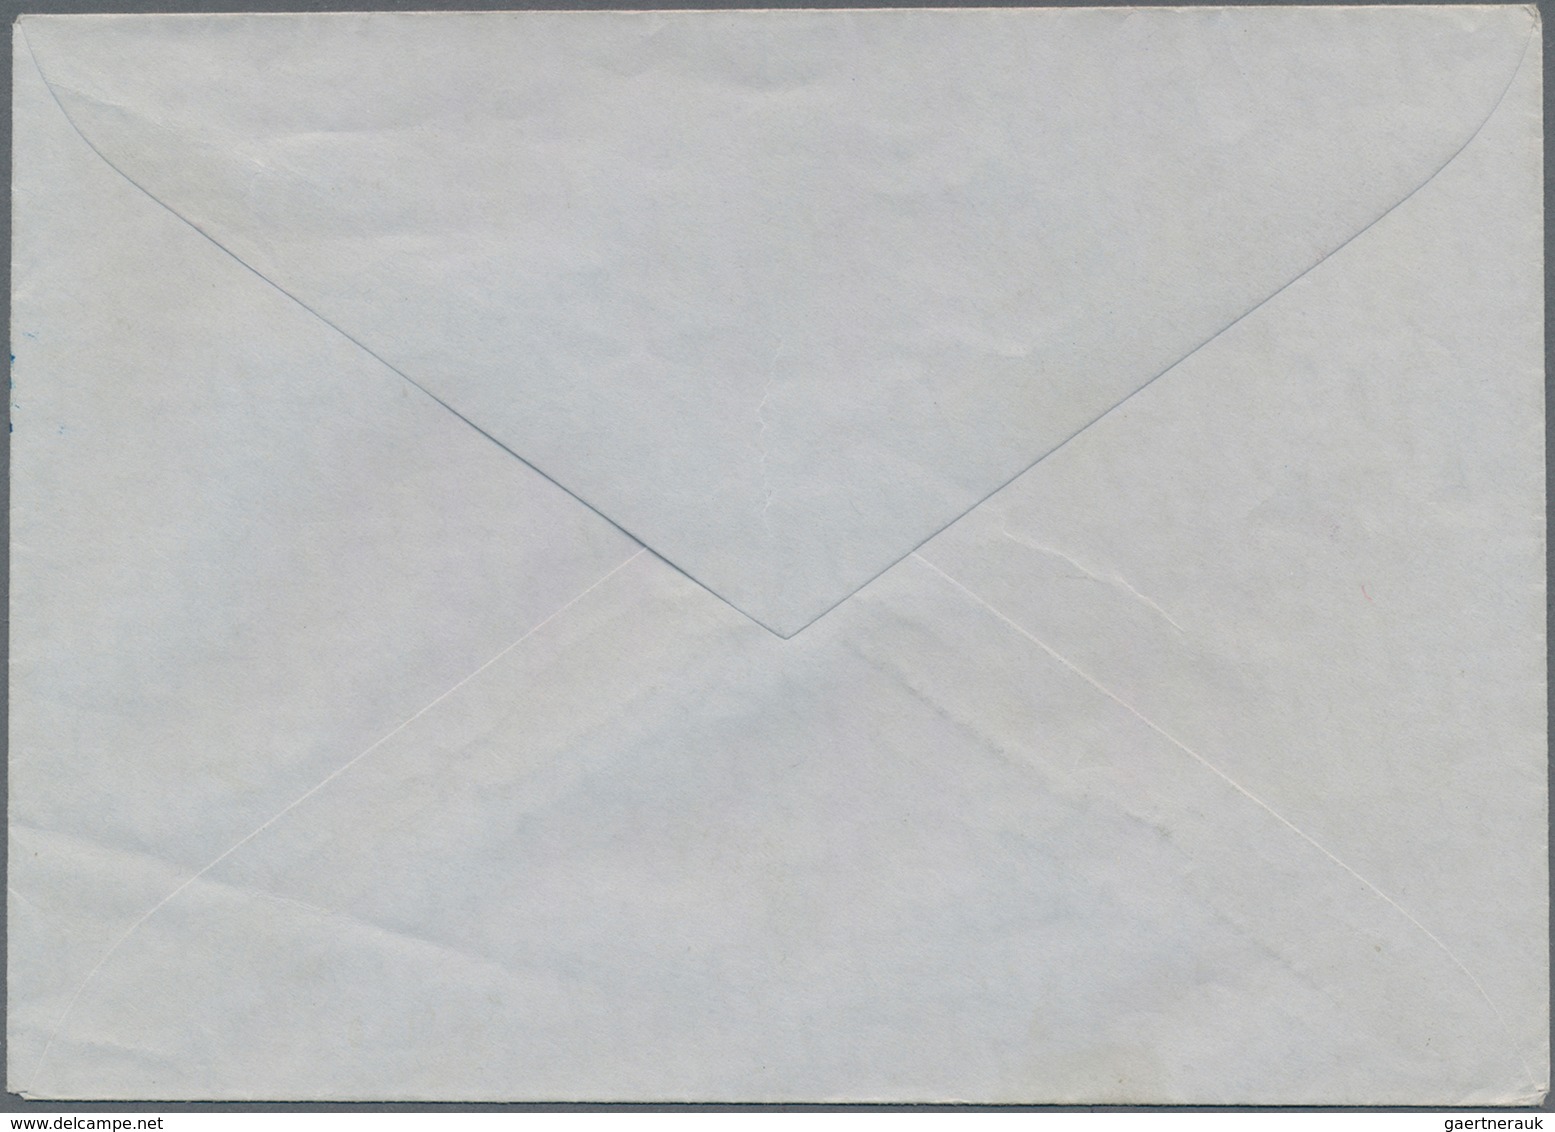 Sowjetunion - Ganzsachen: 1957, Picture Postal Stationery Envelope, Missed Yellow, Red And Green Col - Unclassified